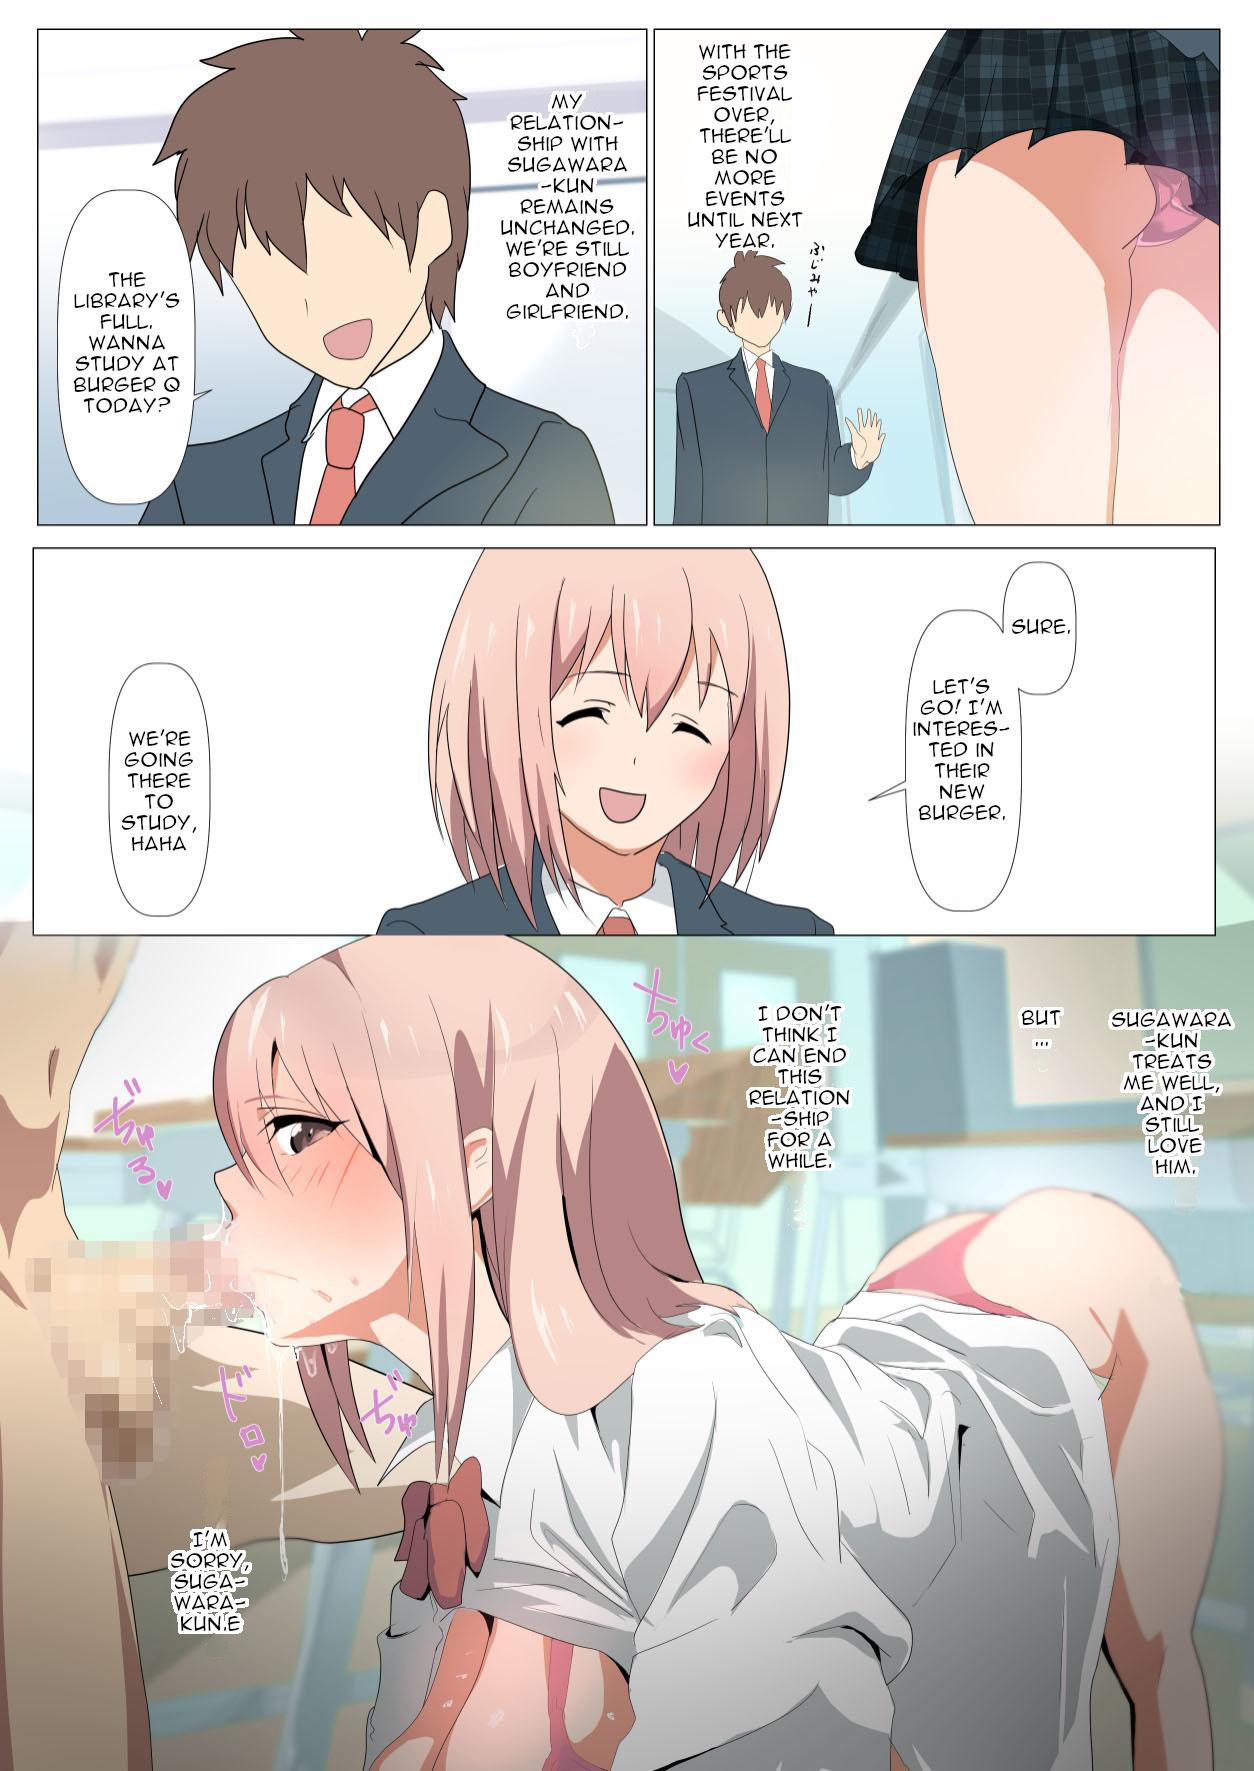 Throat The Day the Ribbon Fell ~ How I was NTR'd by a Playboy in my Class without My Childhood Friend Knowing - Original Blowjob - Page 42